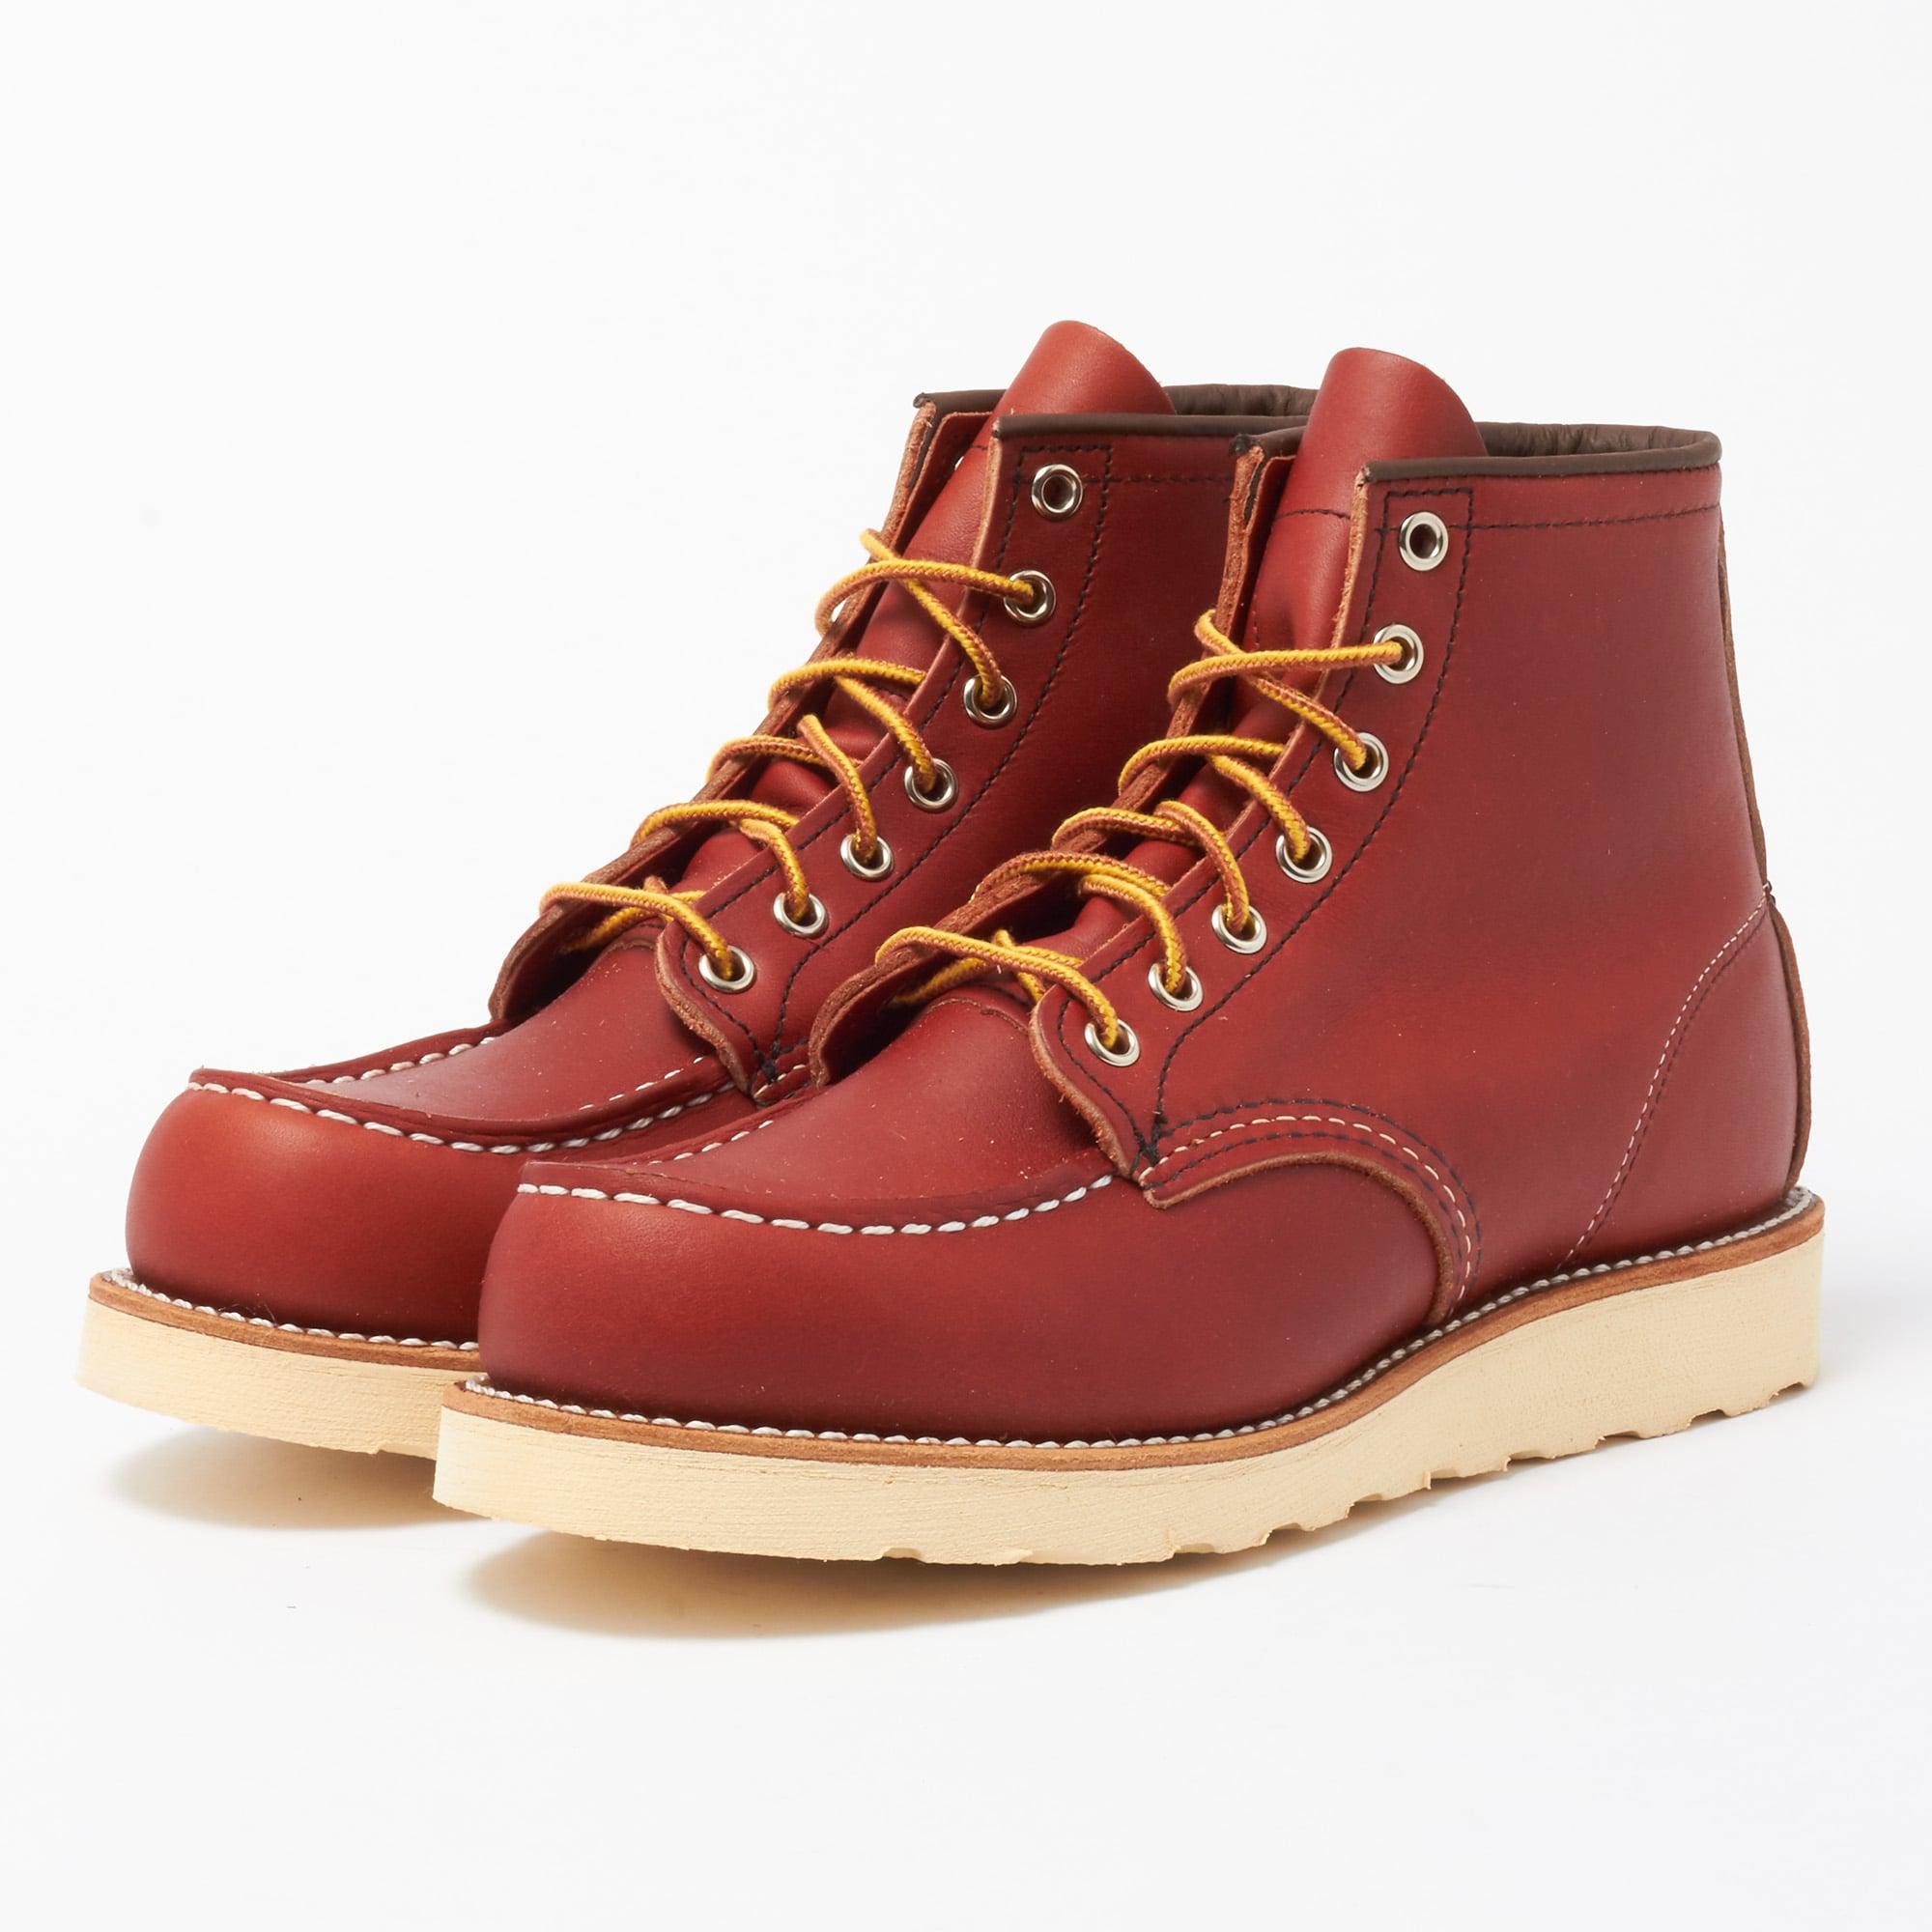 Lyst - Red Wing 6